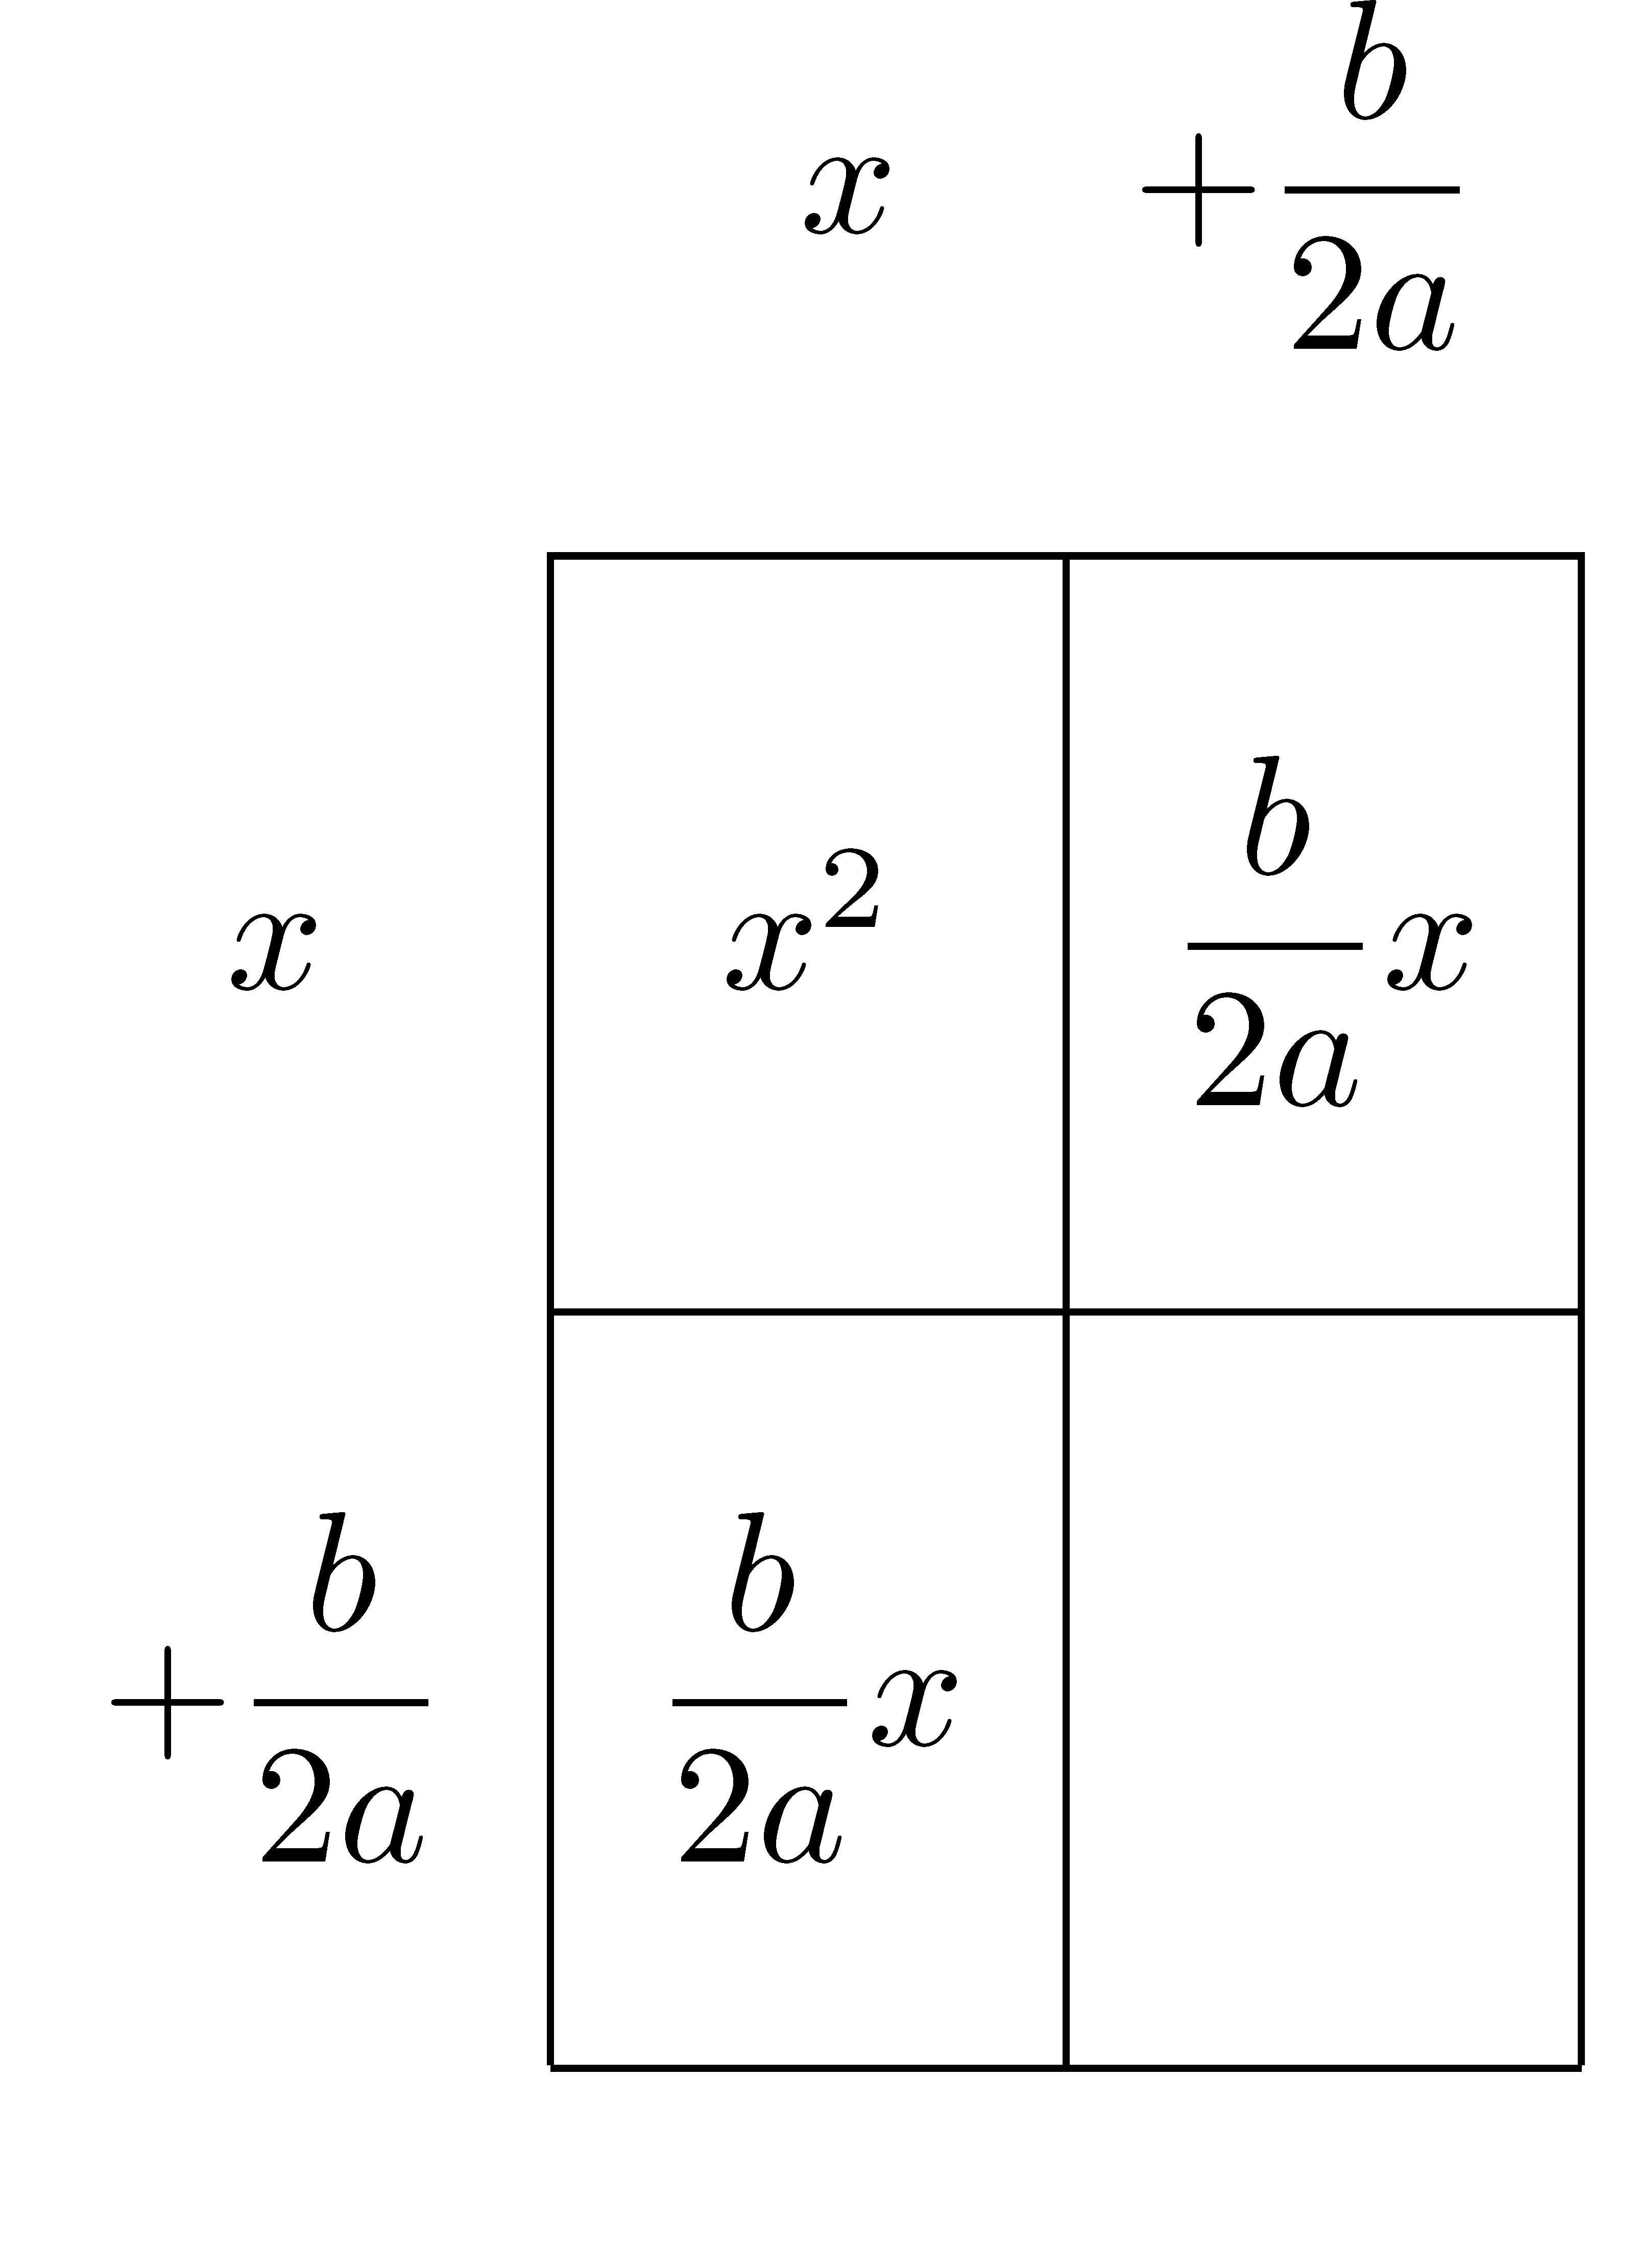 Completing the Square: Area Model